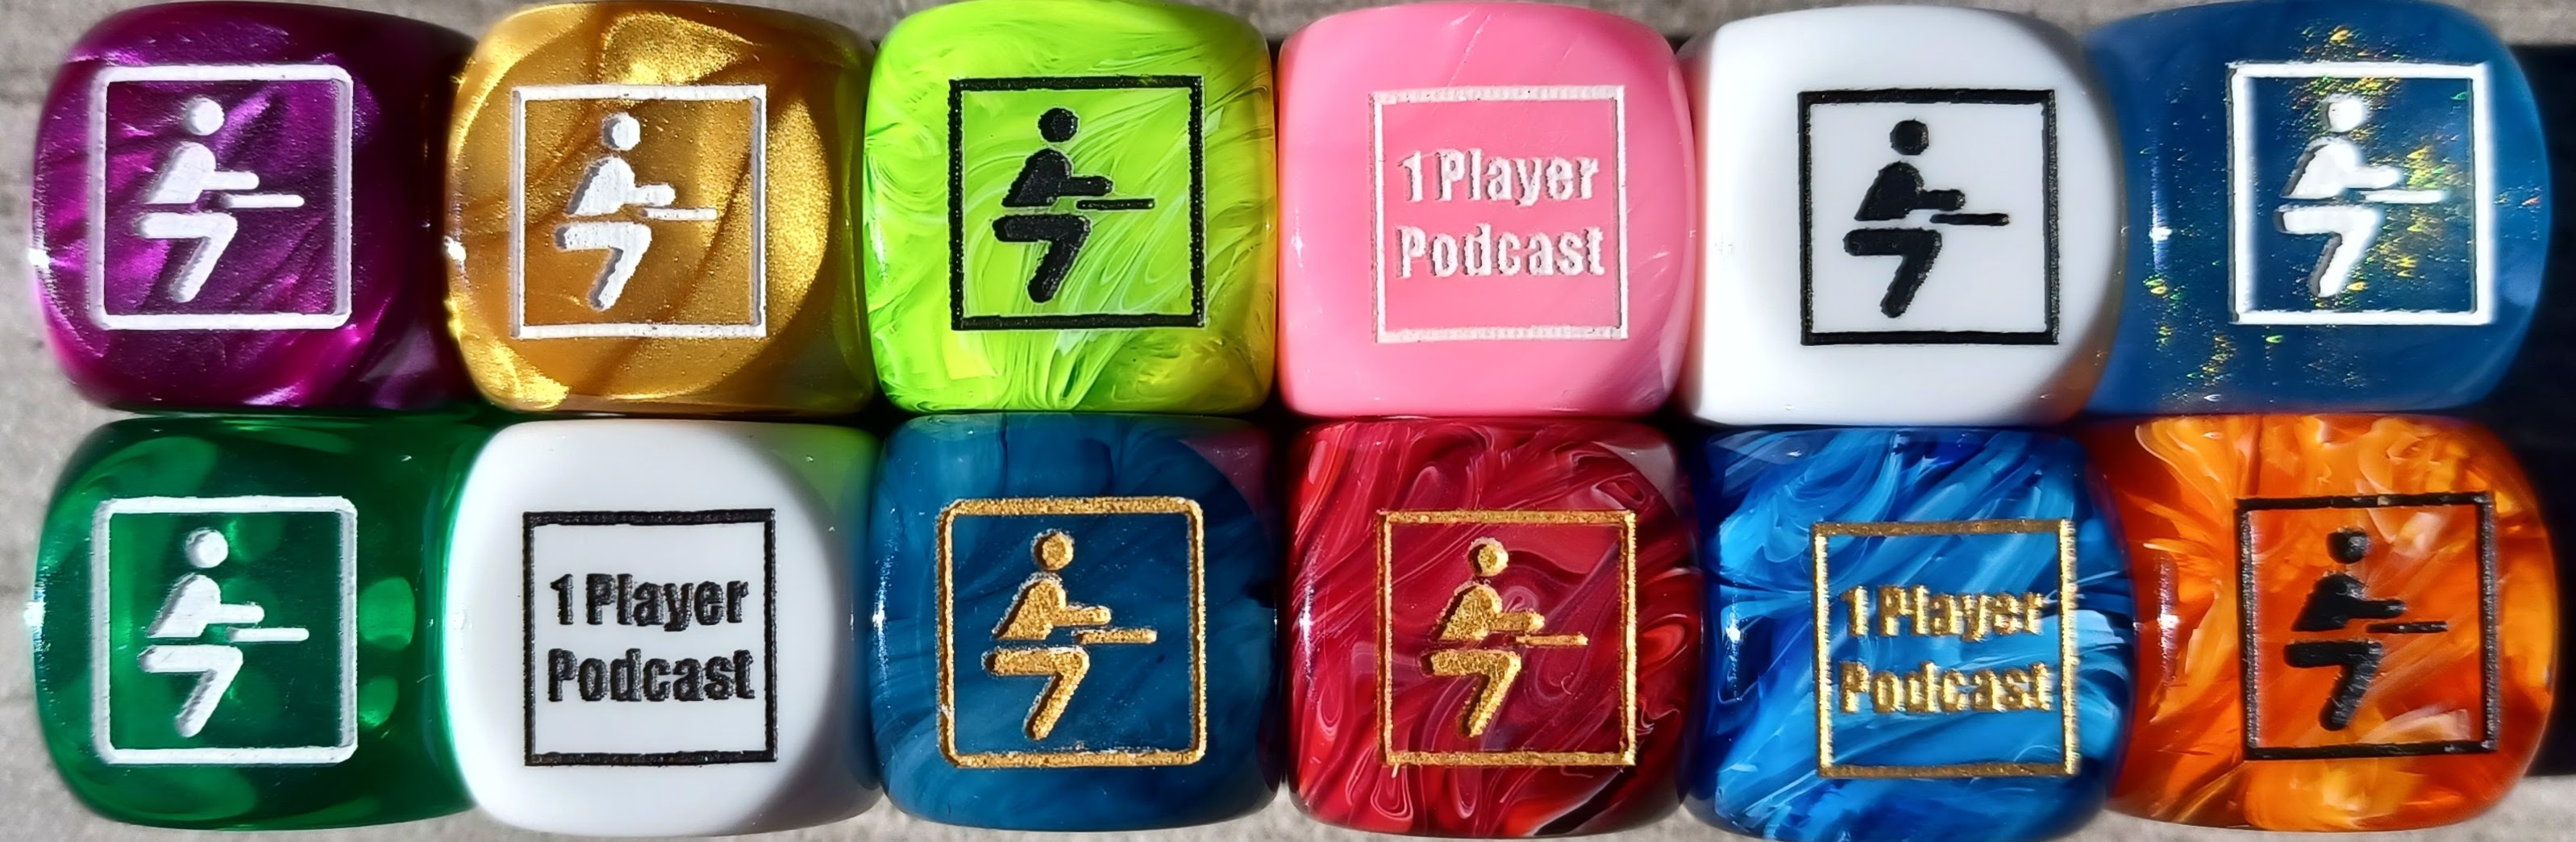 1 Player Podcast